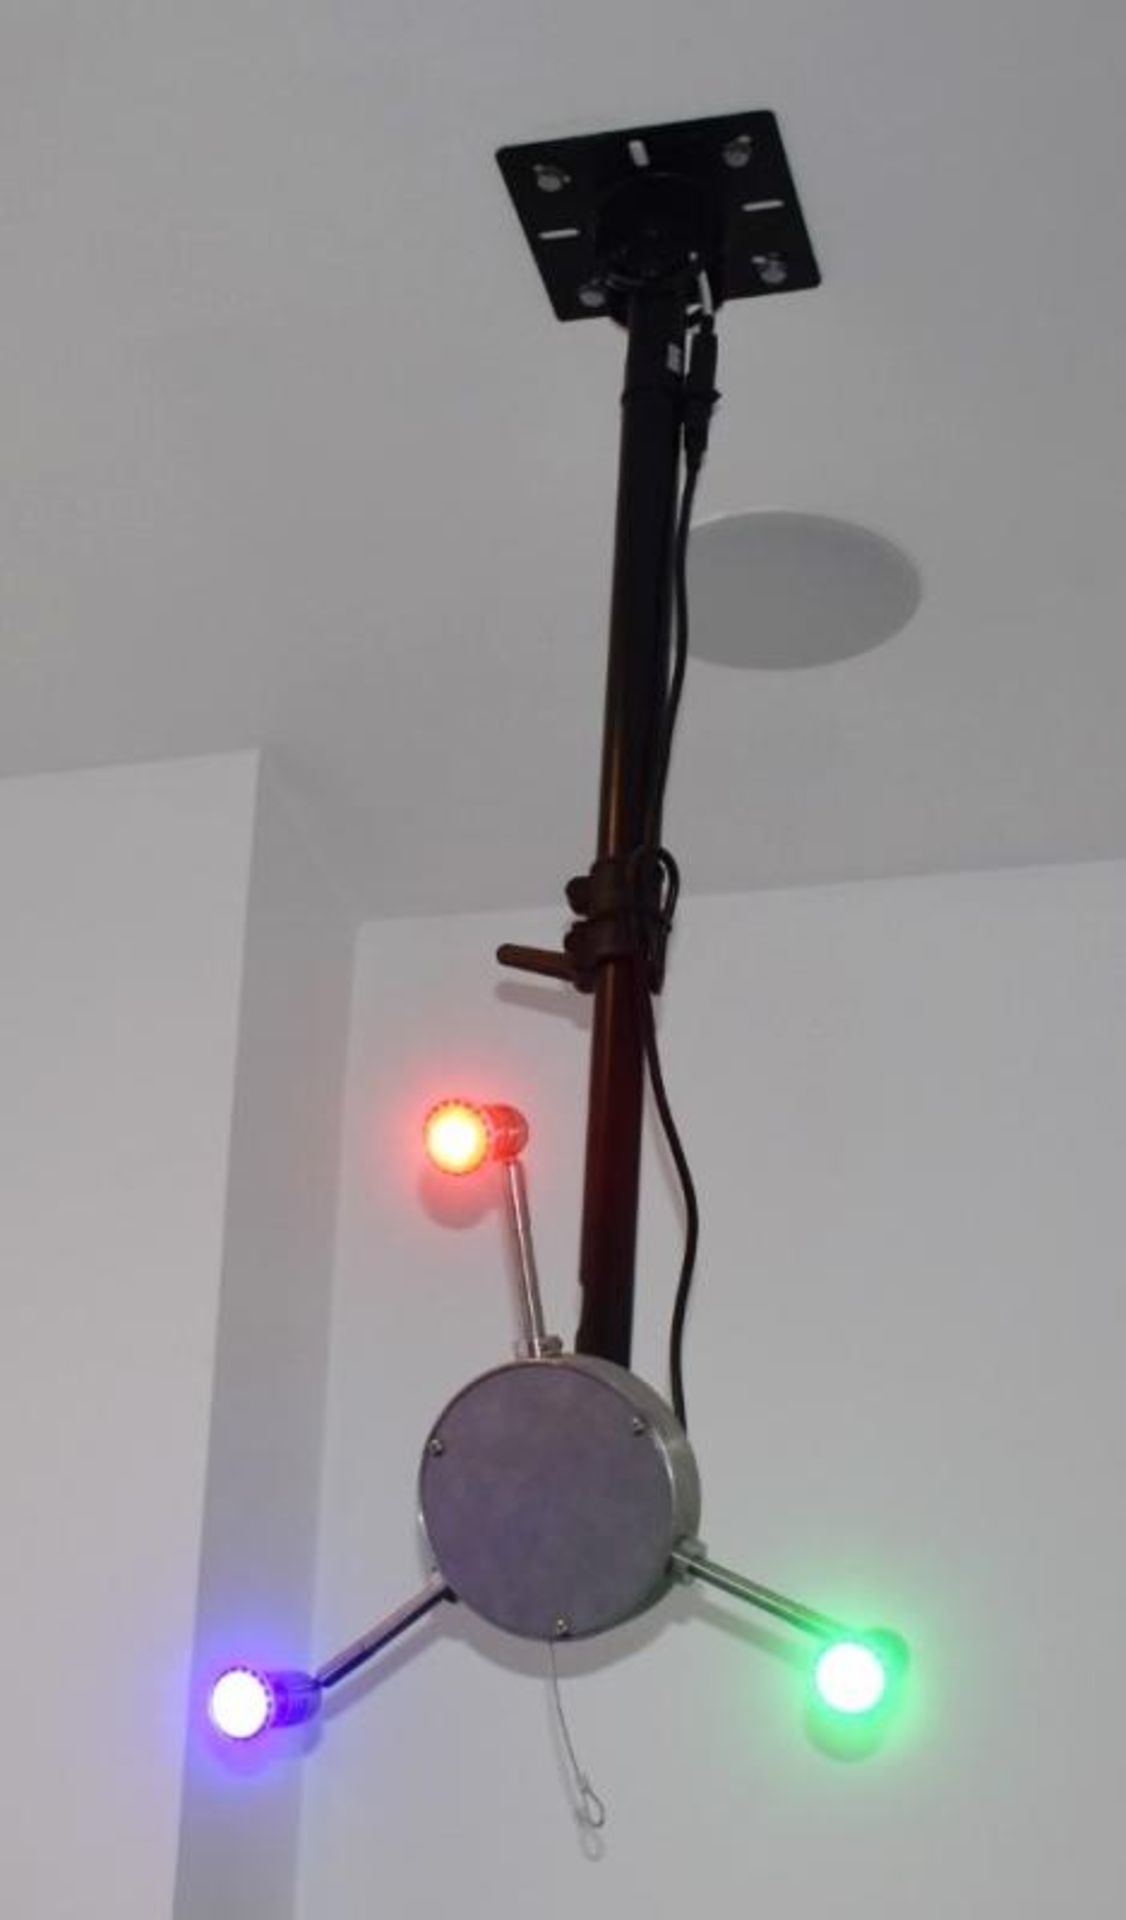 1 x Coloured Shadow Light With Ceiling Bracket - CL489 - Location: Putney, London, SW15 Auction - Image 3 of 5